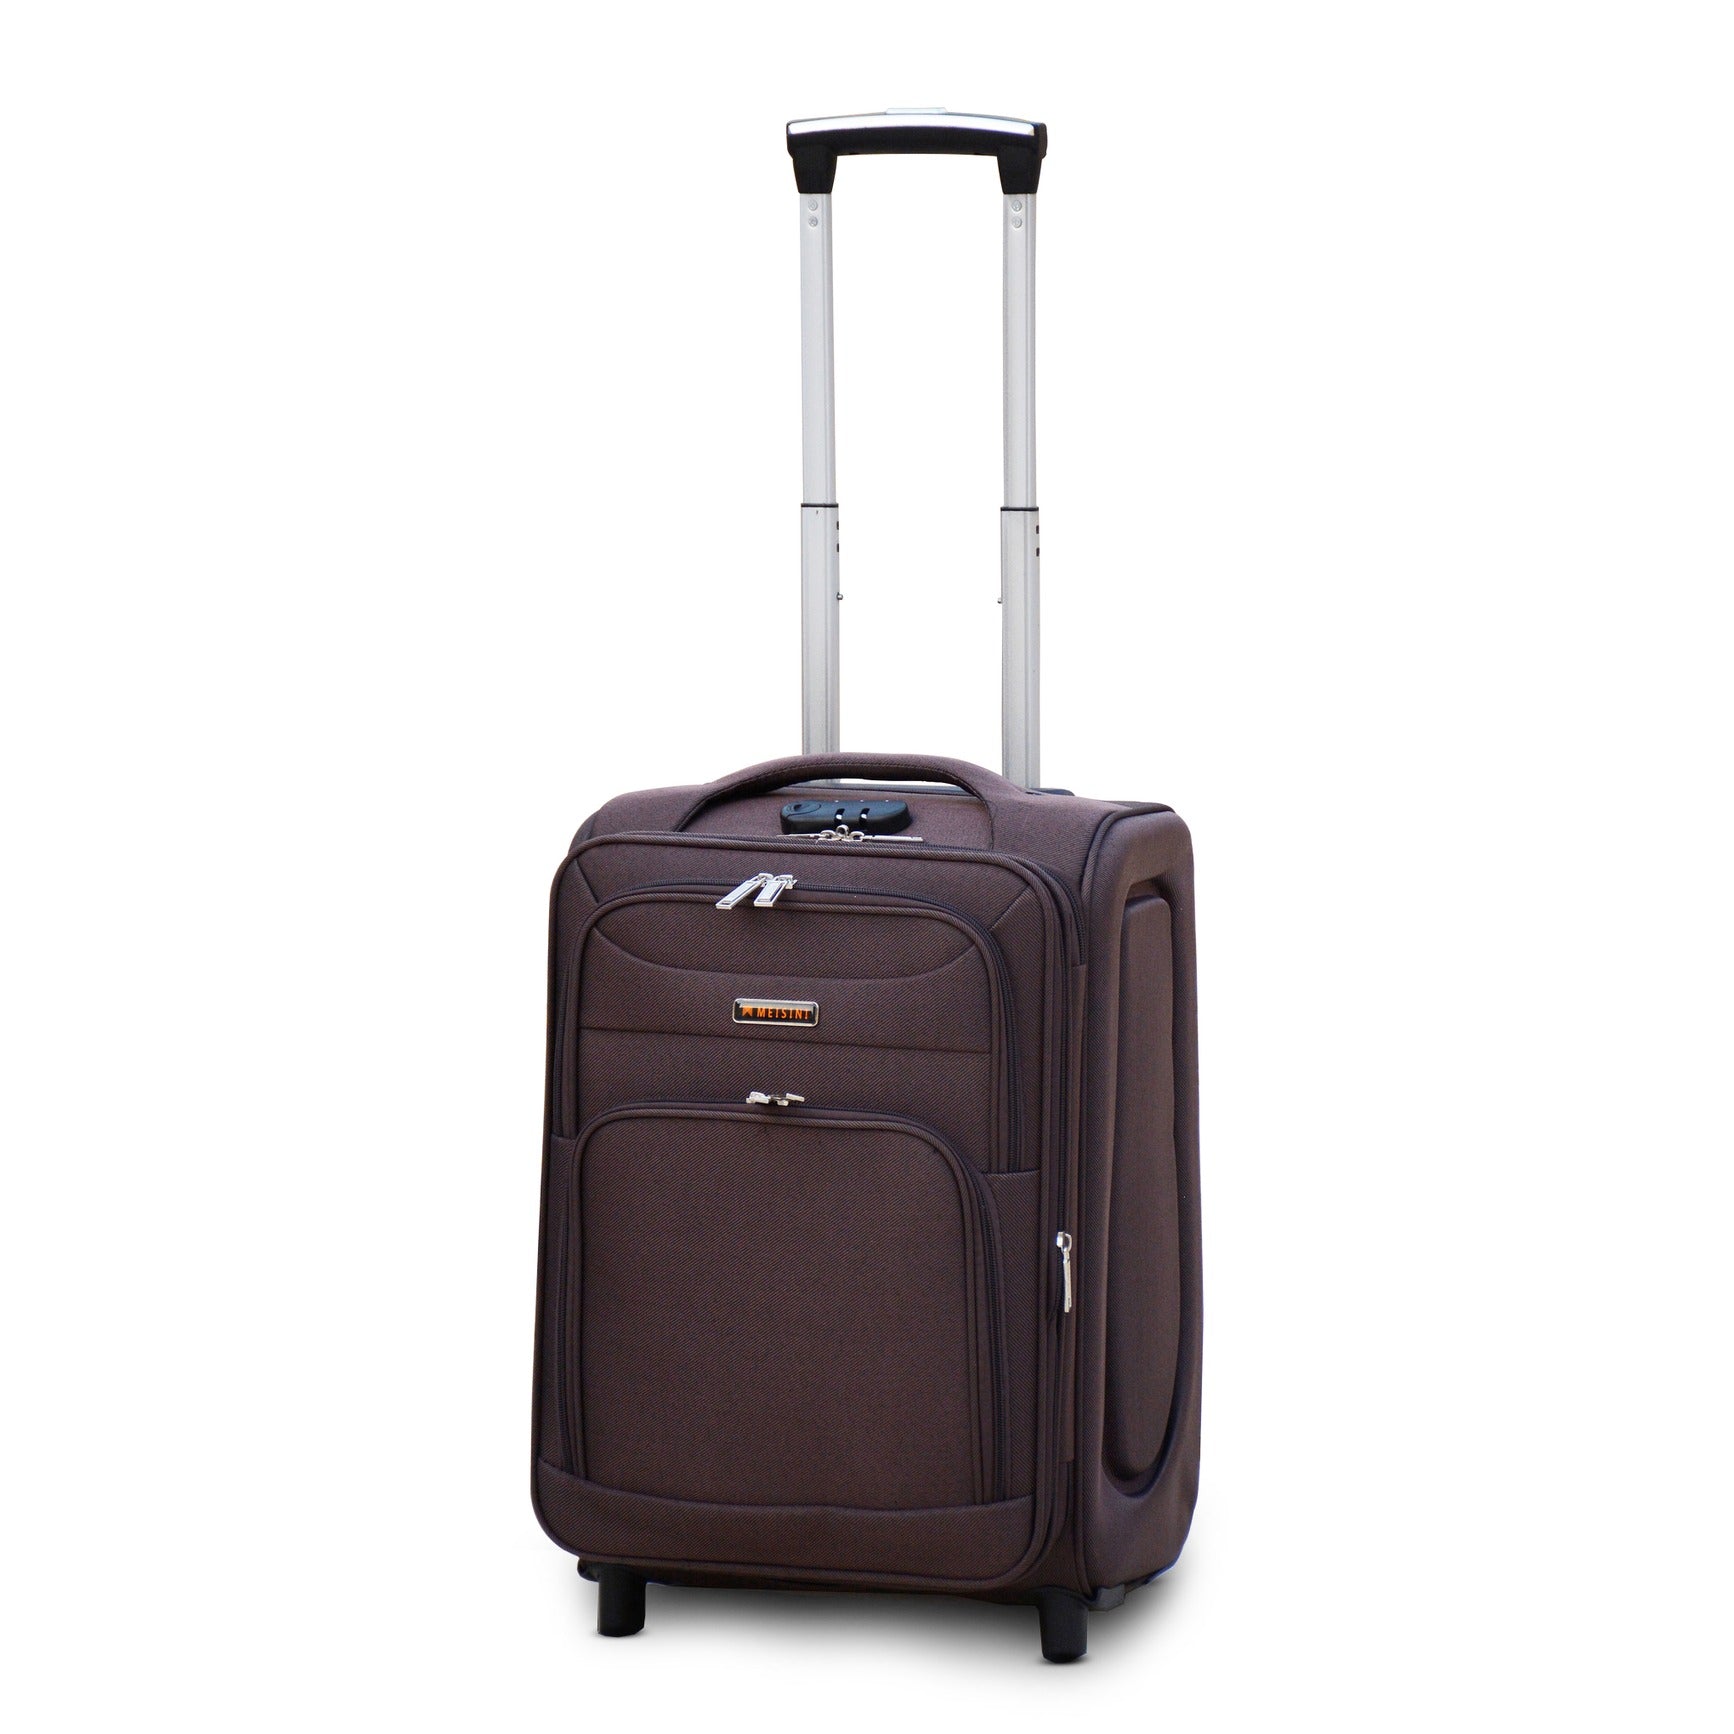 20" Coffee Colour LP 2 Wheel 0161 Luggage Lightweight Soft Material Carry On Trolley Bag